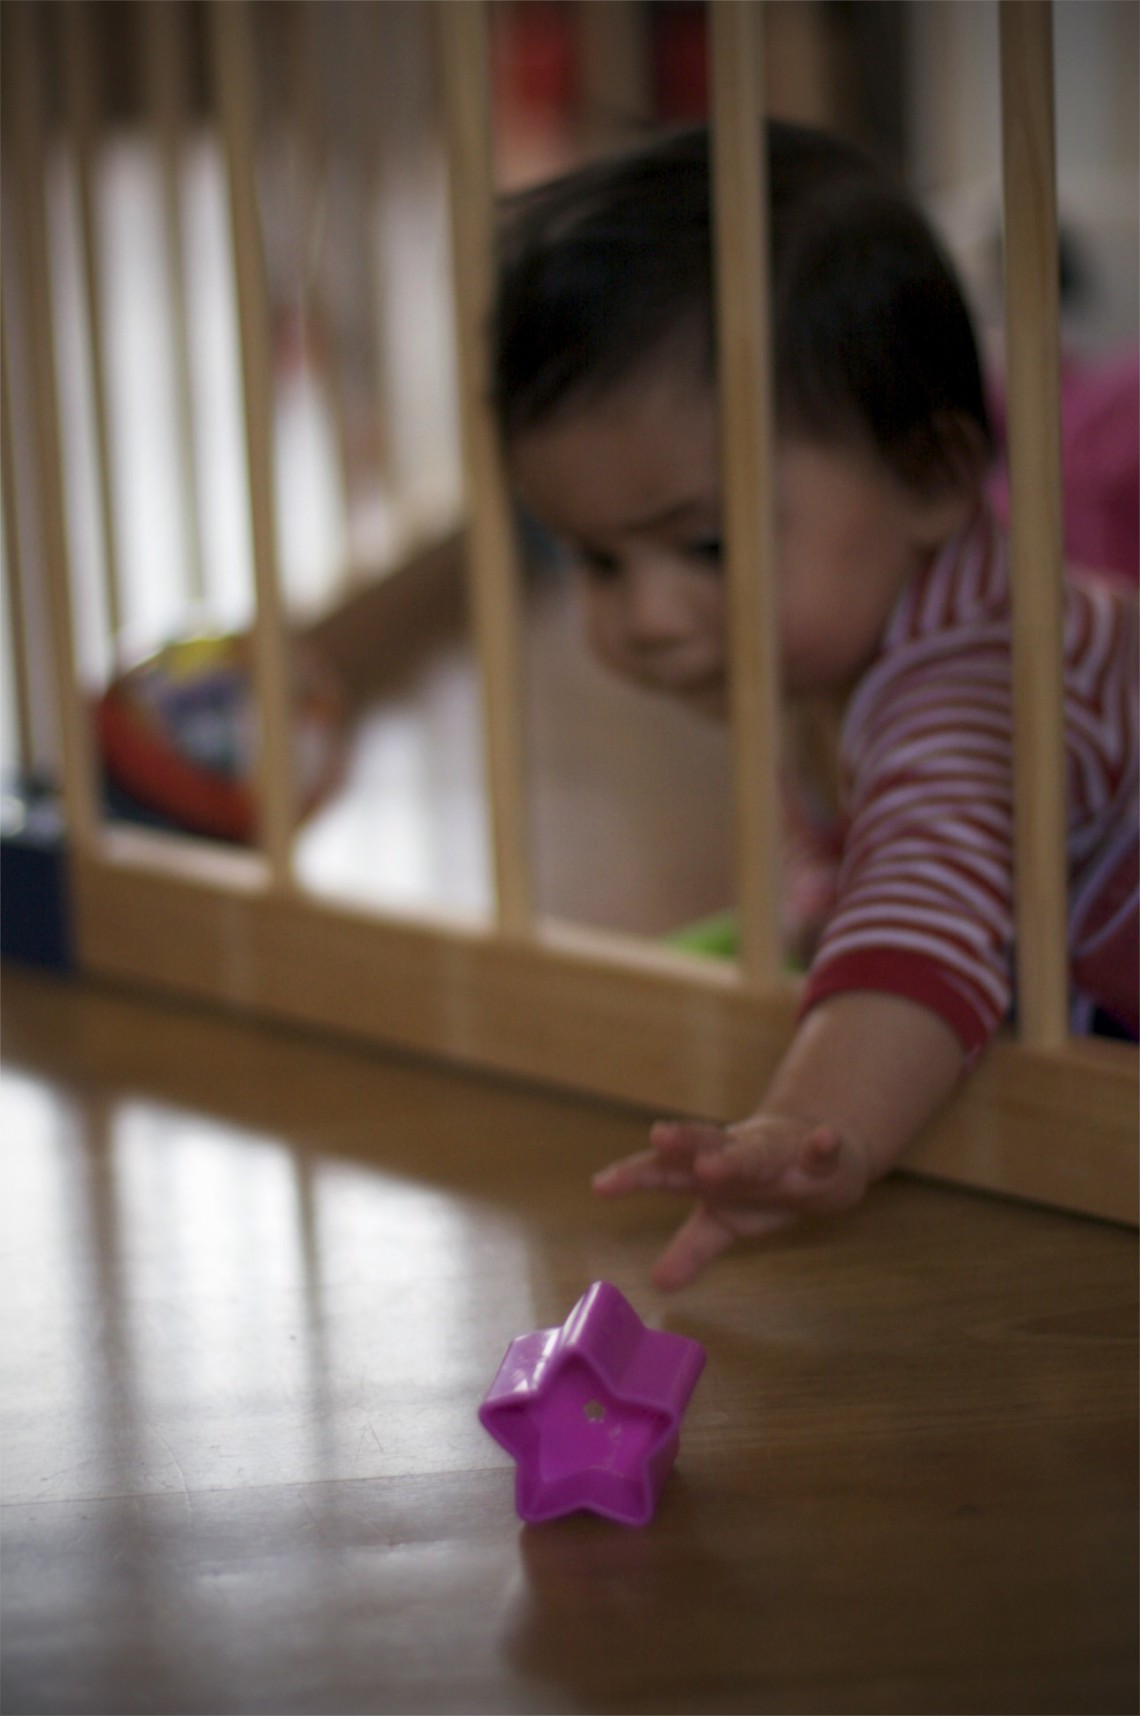 problem solving development in toddlers